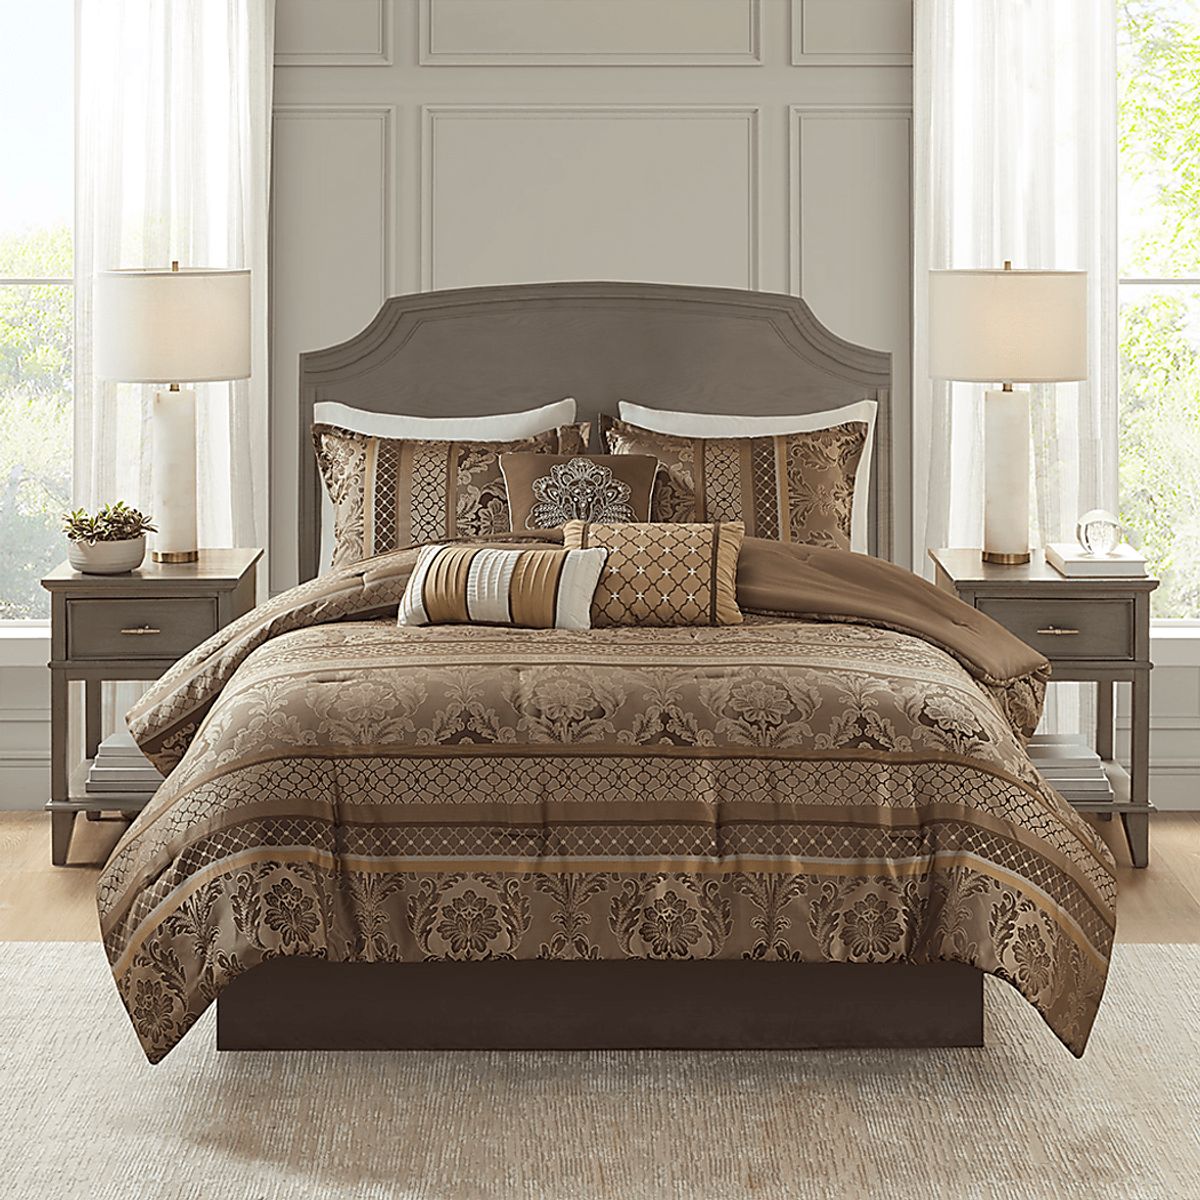 Yewell Brown Polyester Fabric 7 Pc Queen Comforter Set | Rooms to Go